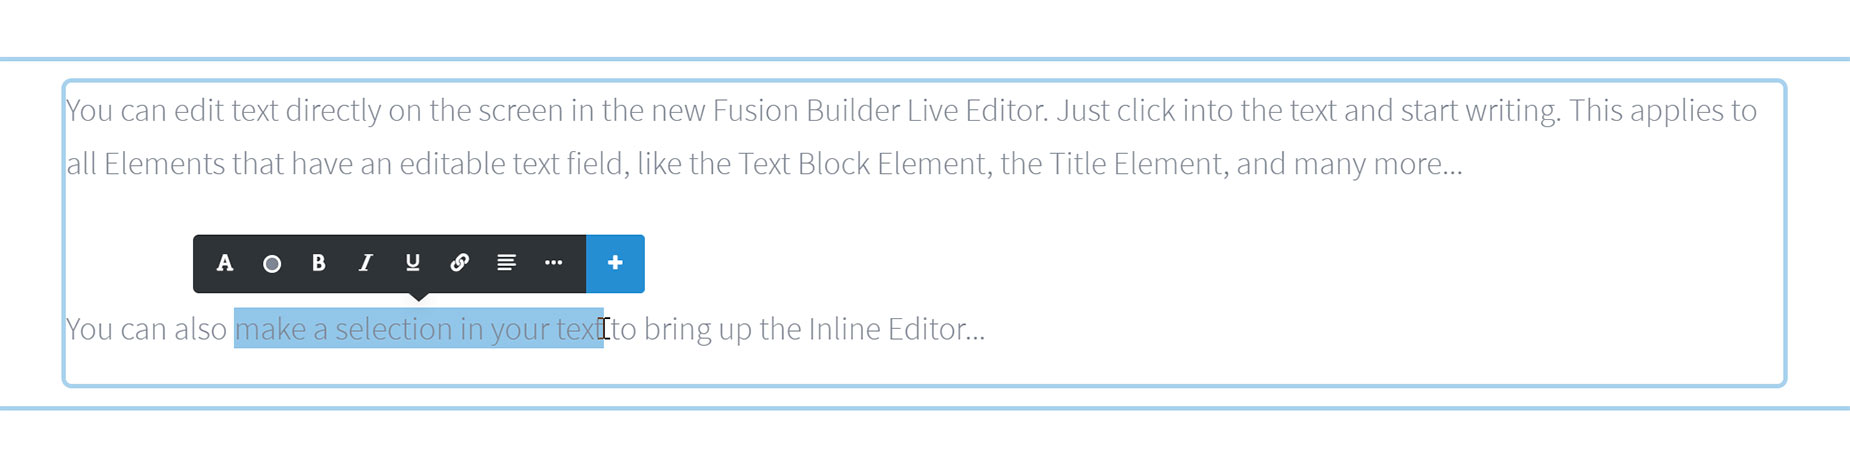 Text Block Element in Fusion Builder Live